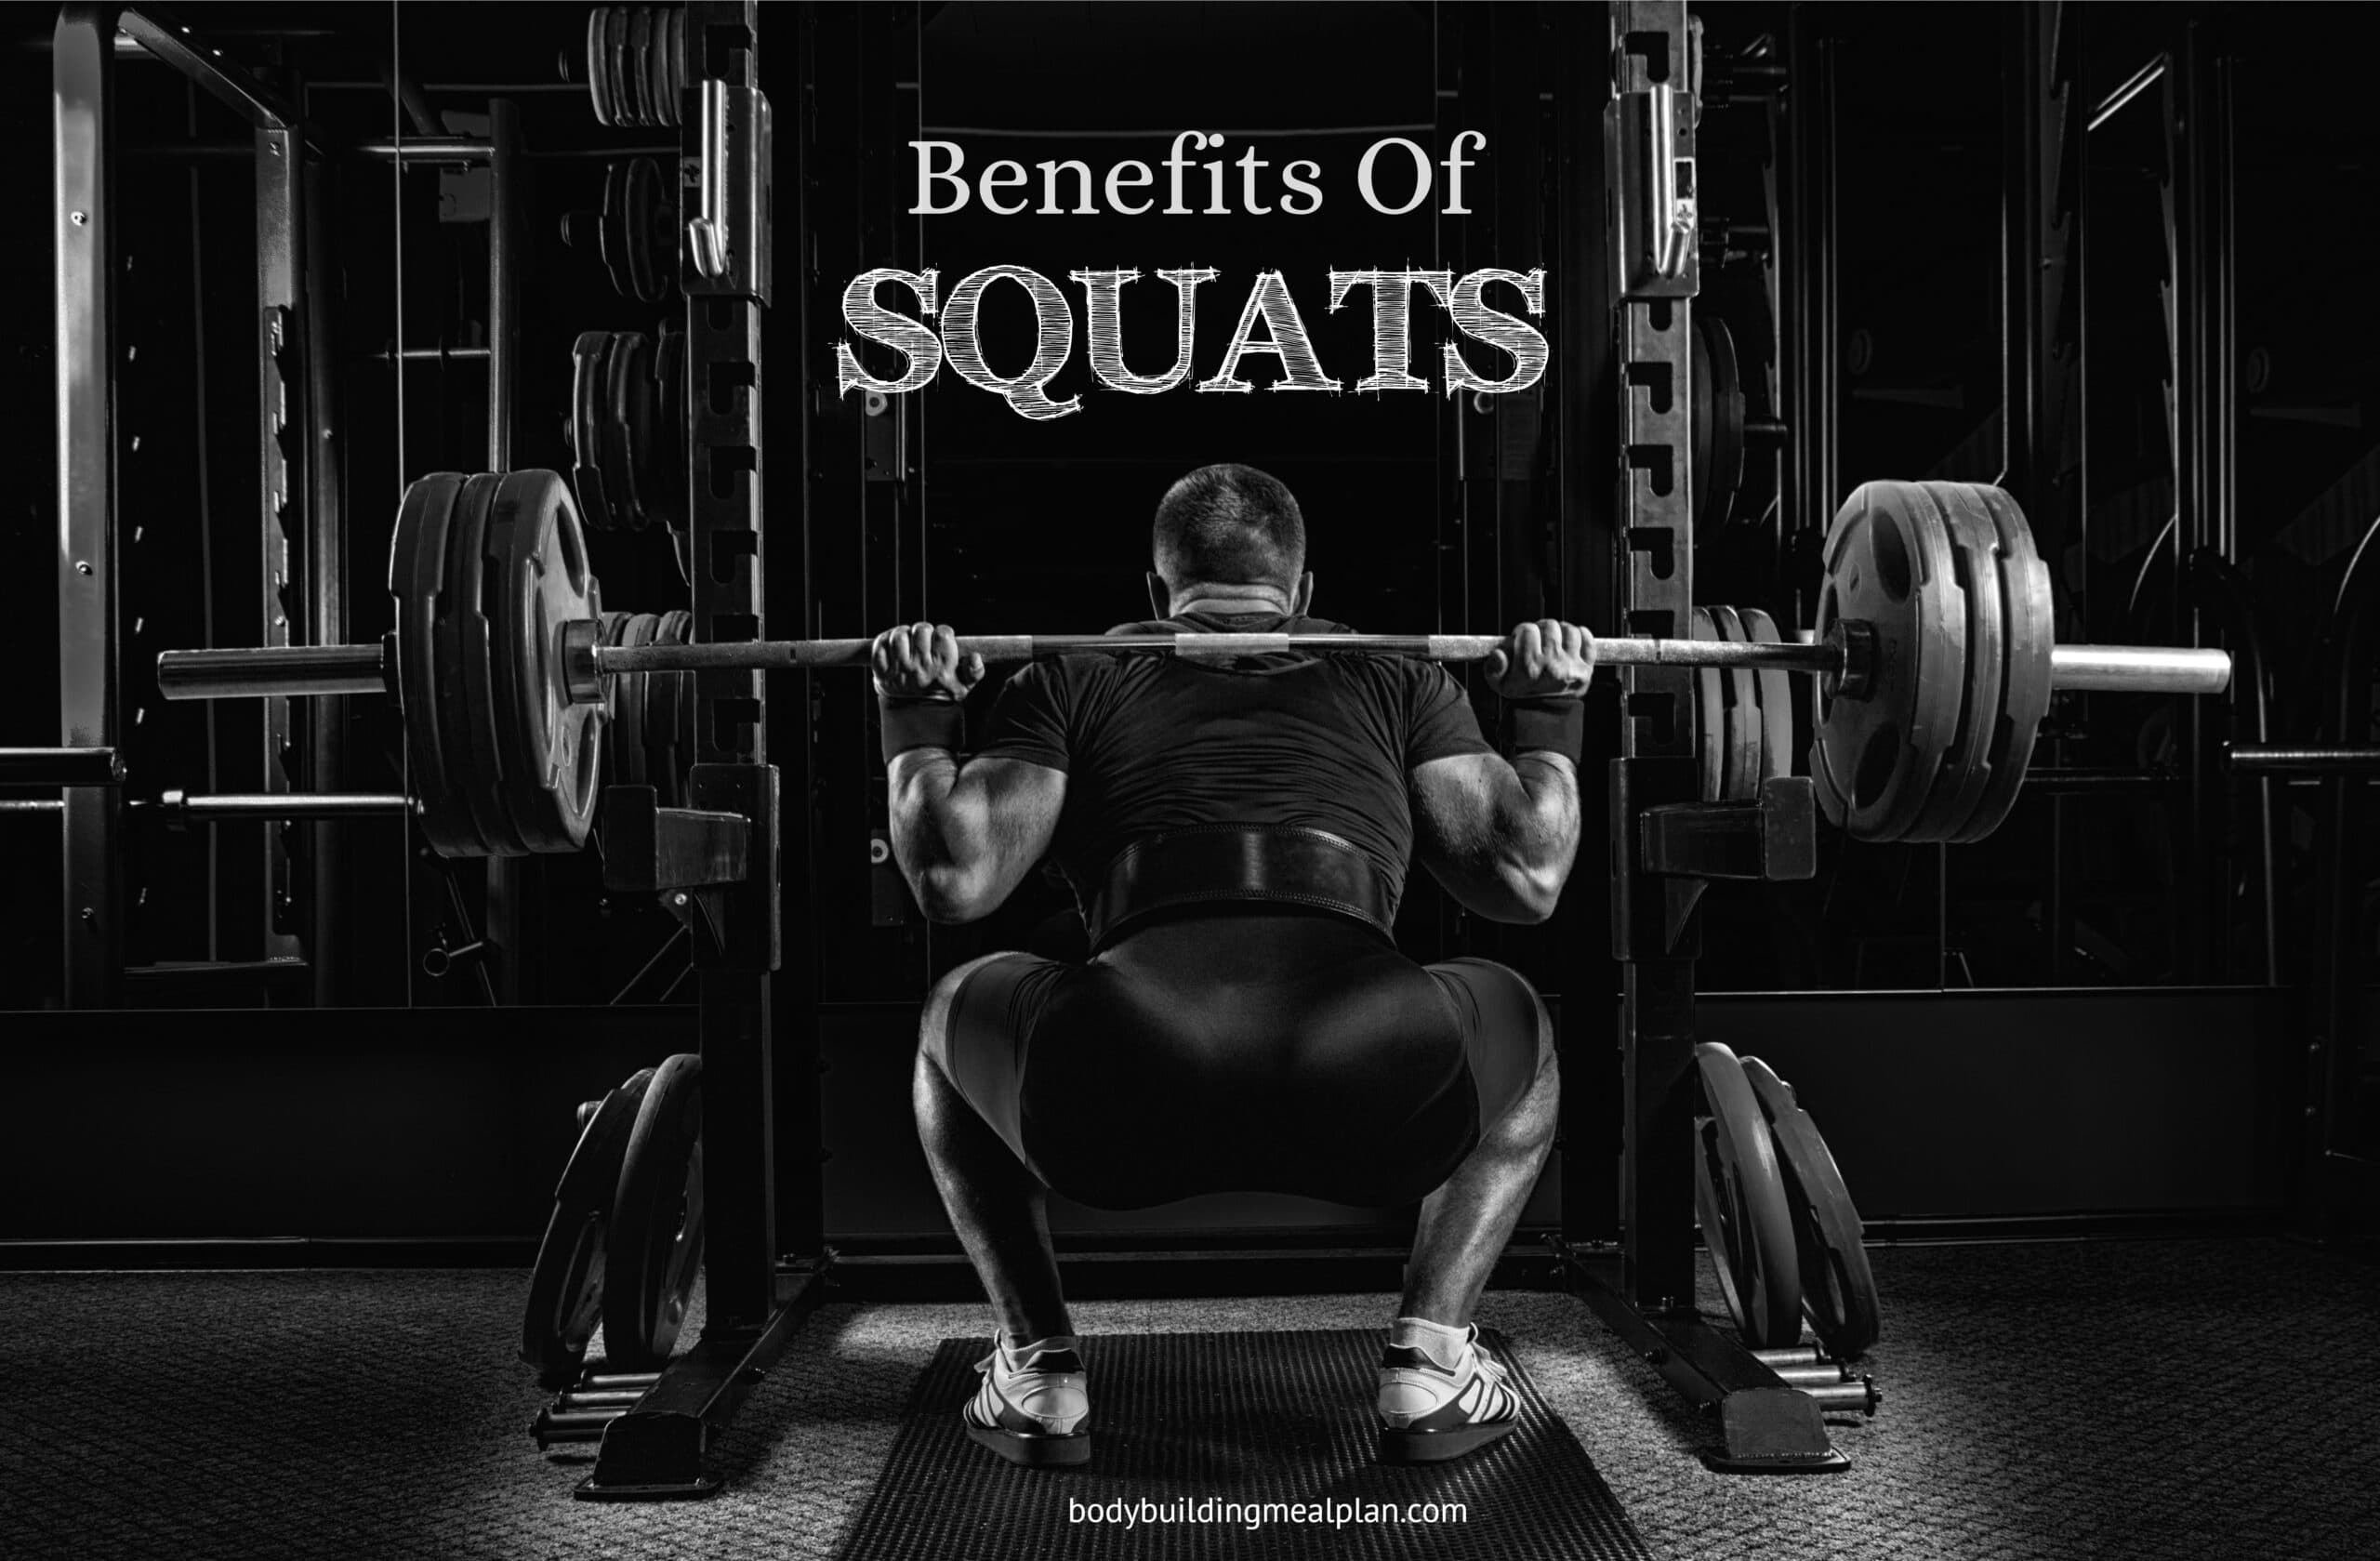 Check our 11 benefits of squats